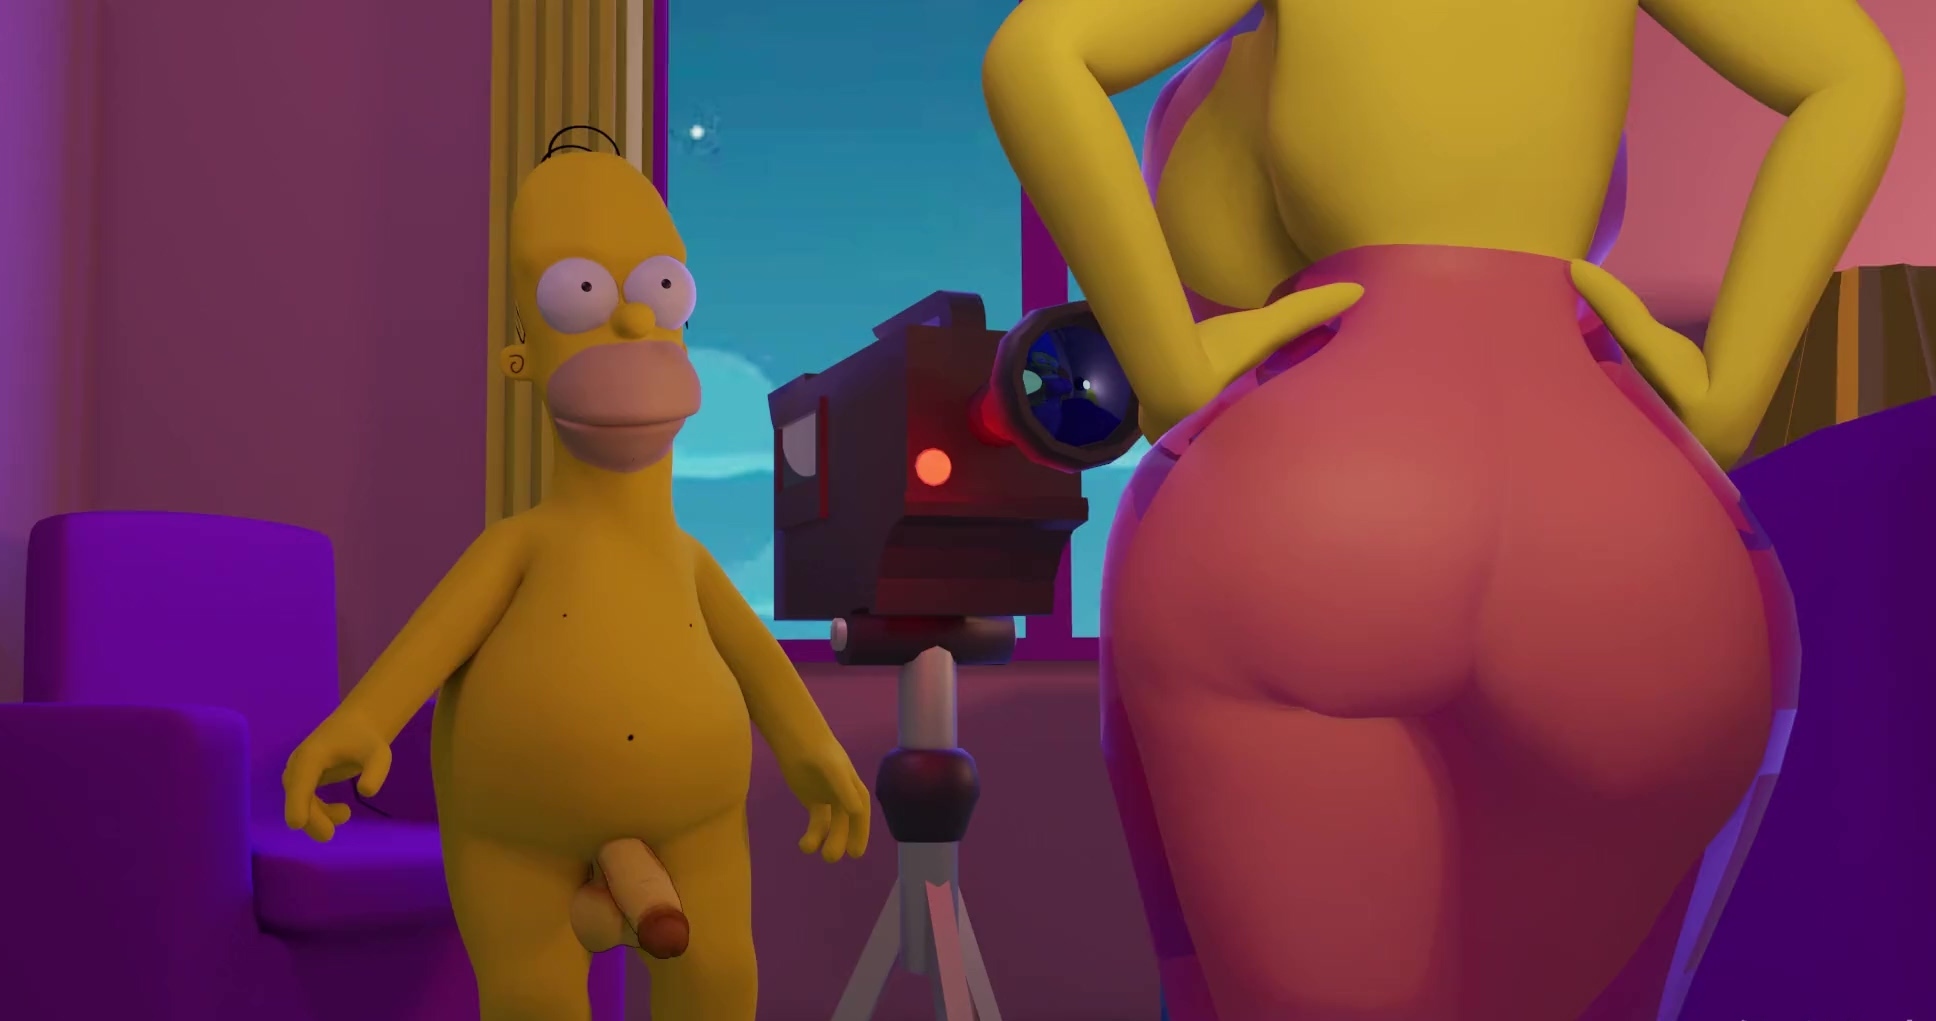 A perverted Simpsons parody picture